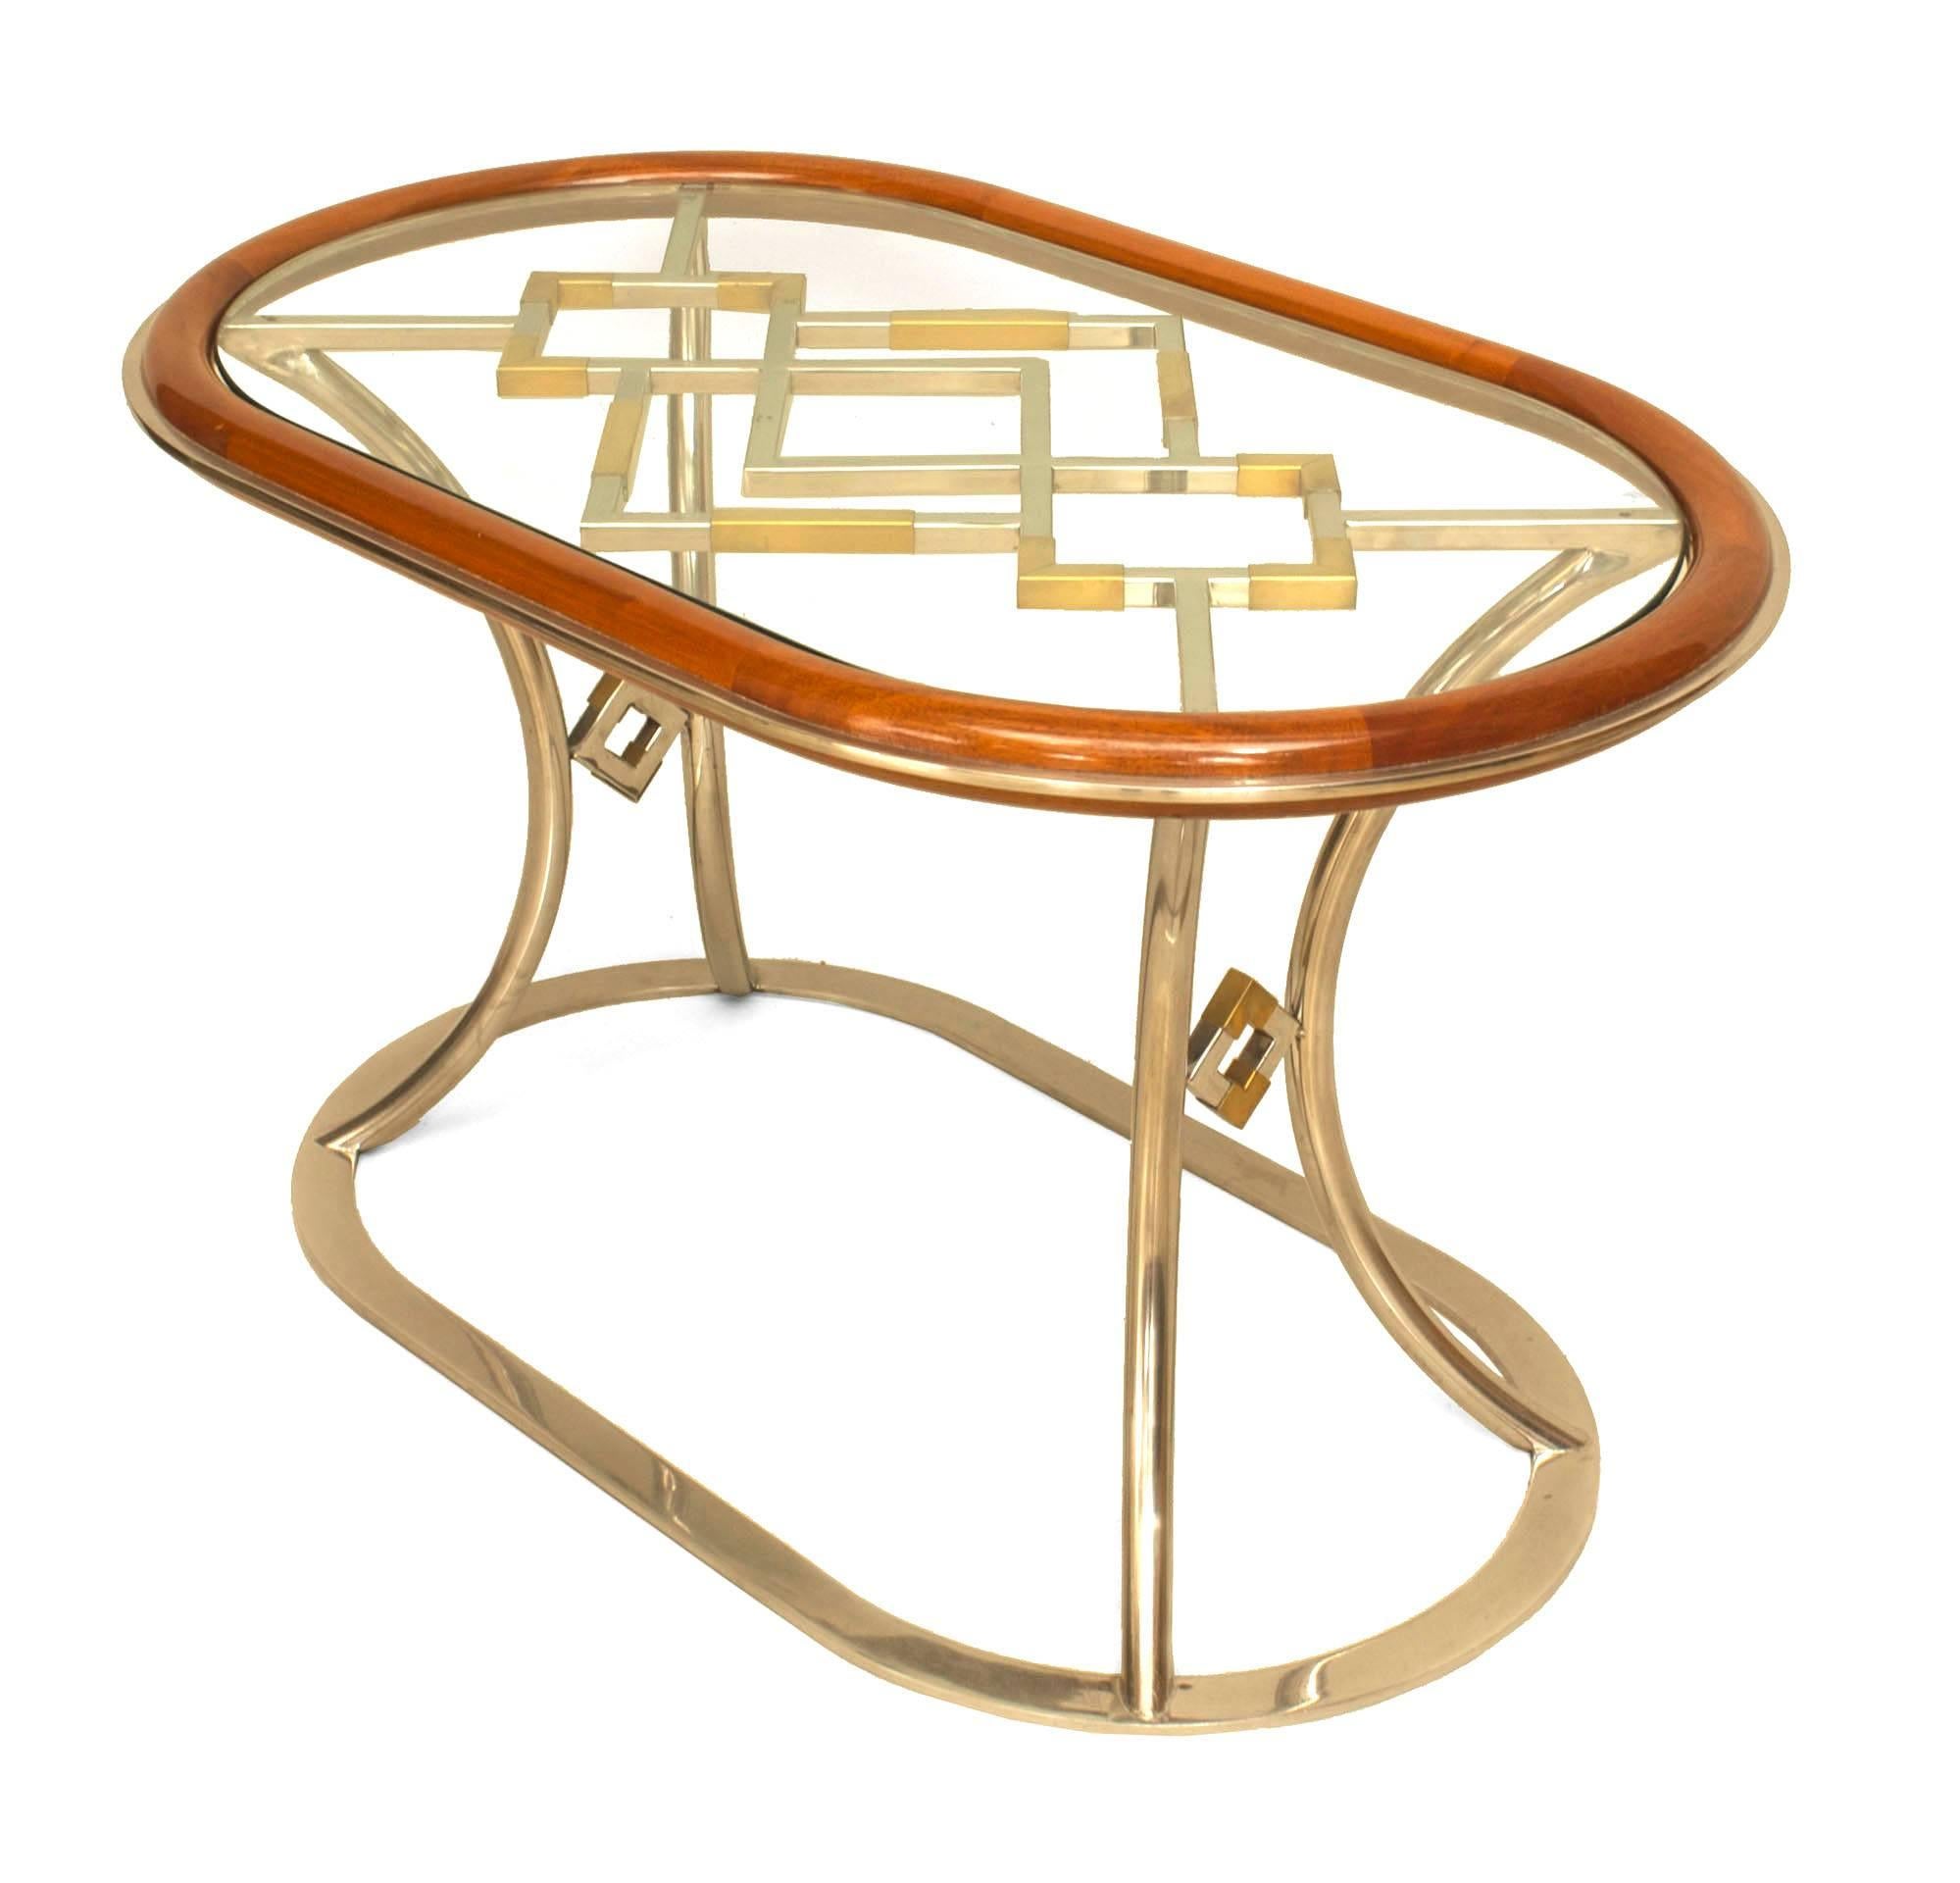 Pair of French Post-War Design (1970s) oval coffee tables with a mahogany rim holding a glass top over an open brass design resting on chrome plated base. (designed by Alain Delon for Maison Jansen) (PRICED AS Pair)
